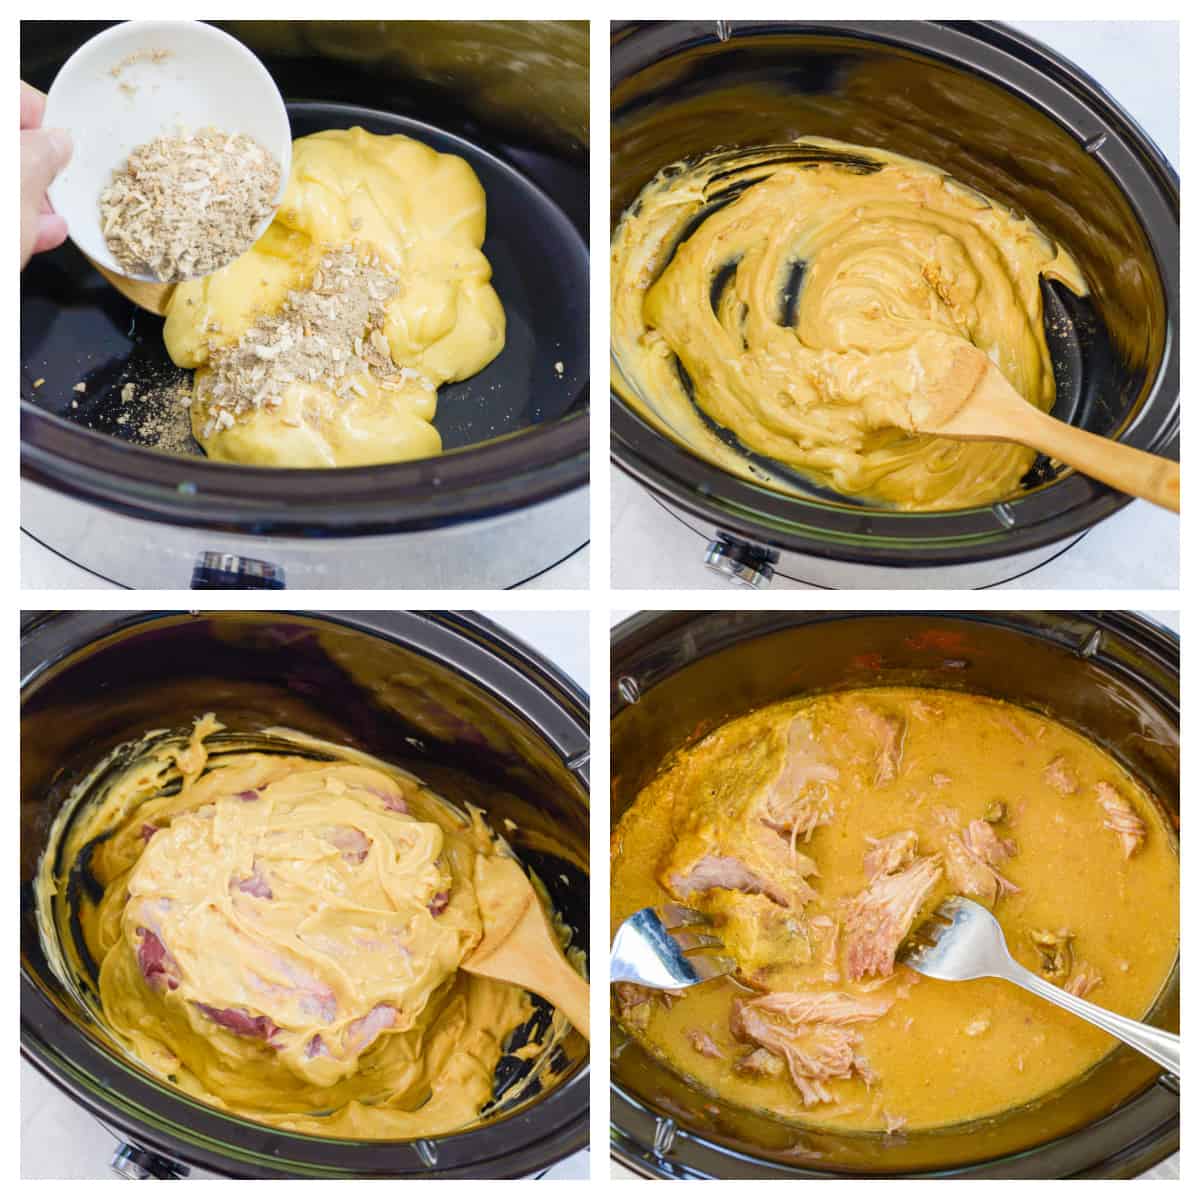 Collage showing how to make crockpot pork roast with gravy.